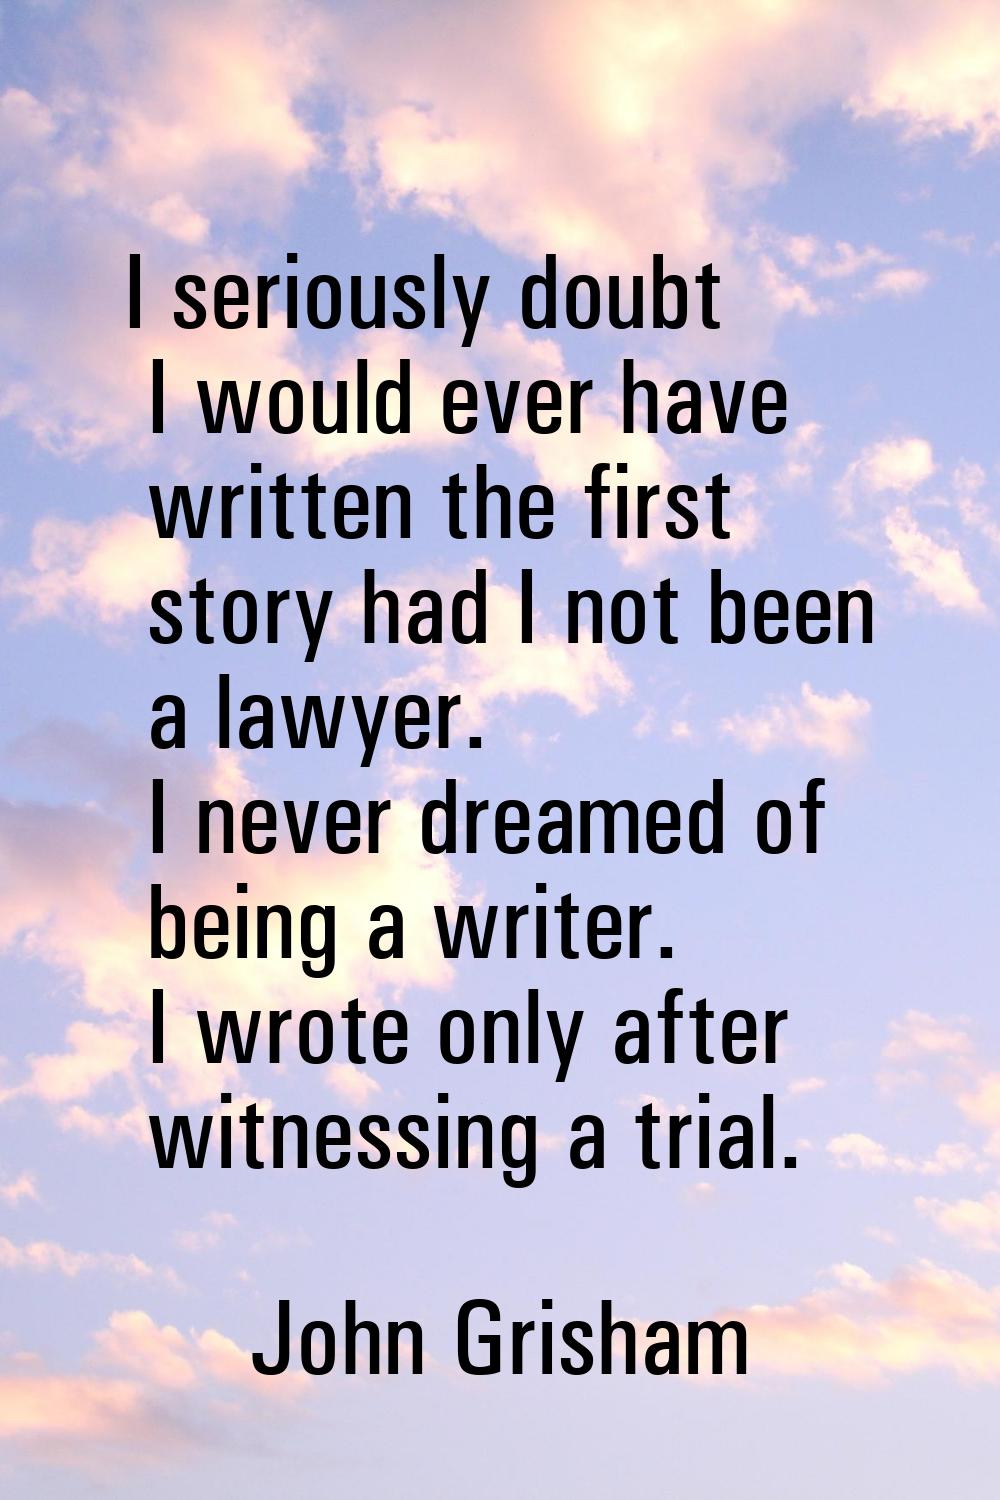 I seriously doubt I would ever have written the first story had I not been a lawyer. I never dreame